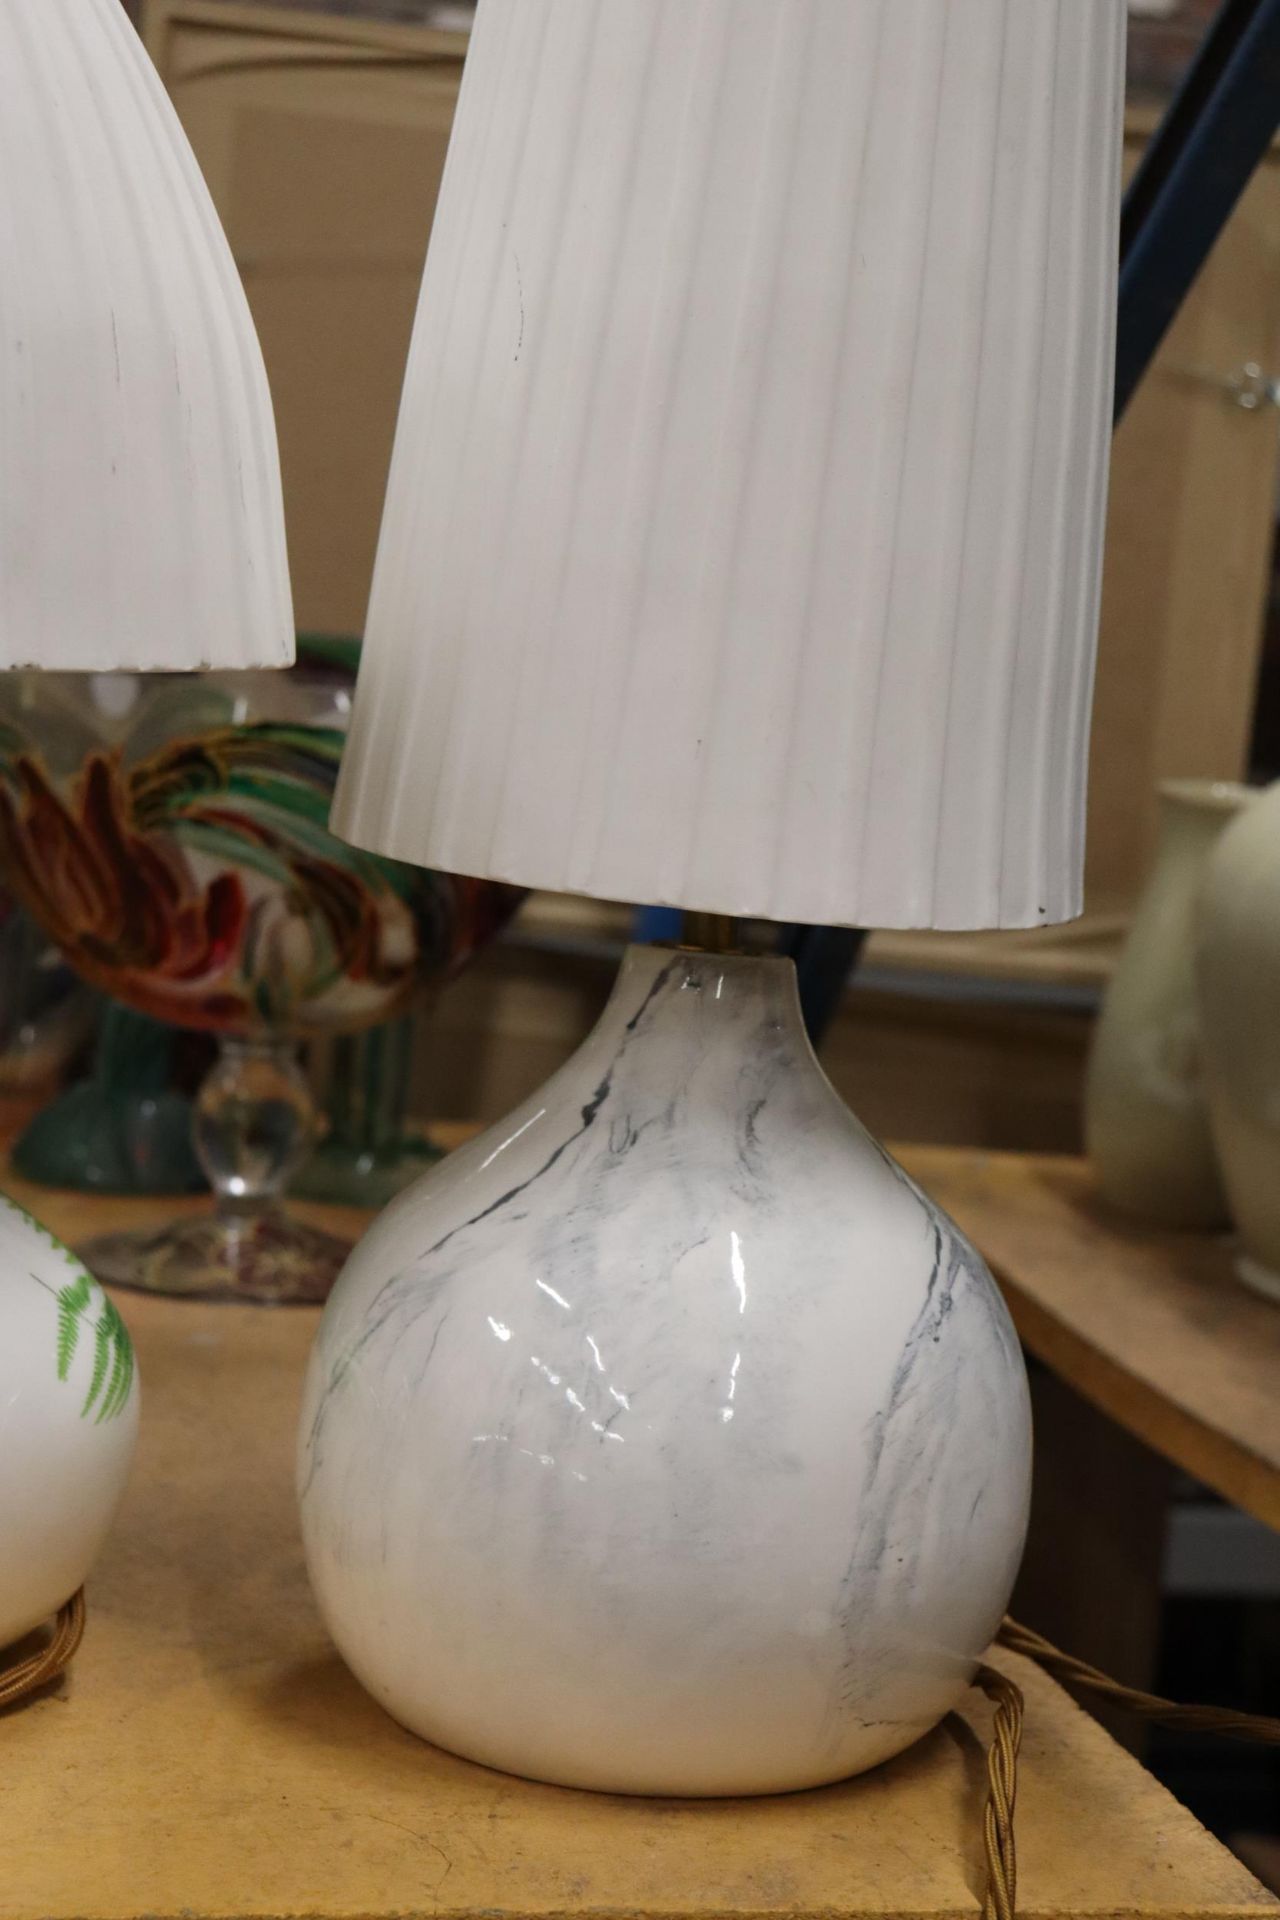 TWO CERAMIC TABLE LAMPS WITH CERAMIC SHADES - Image 7 of 7